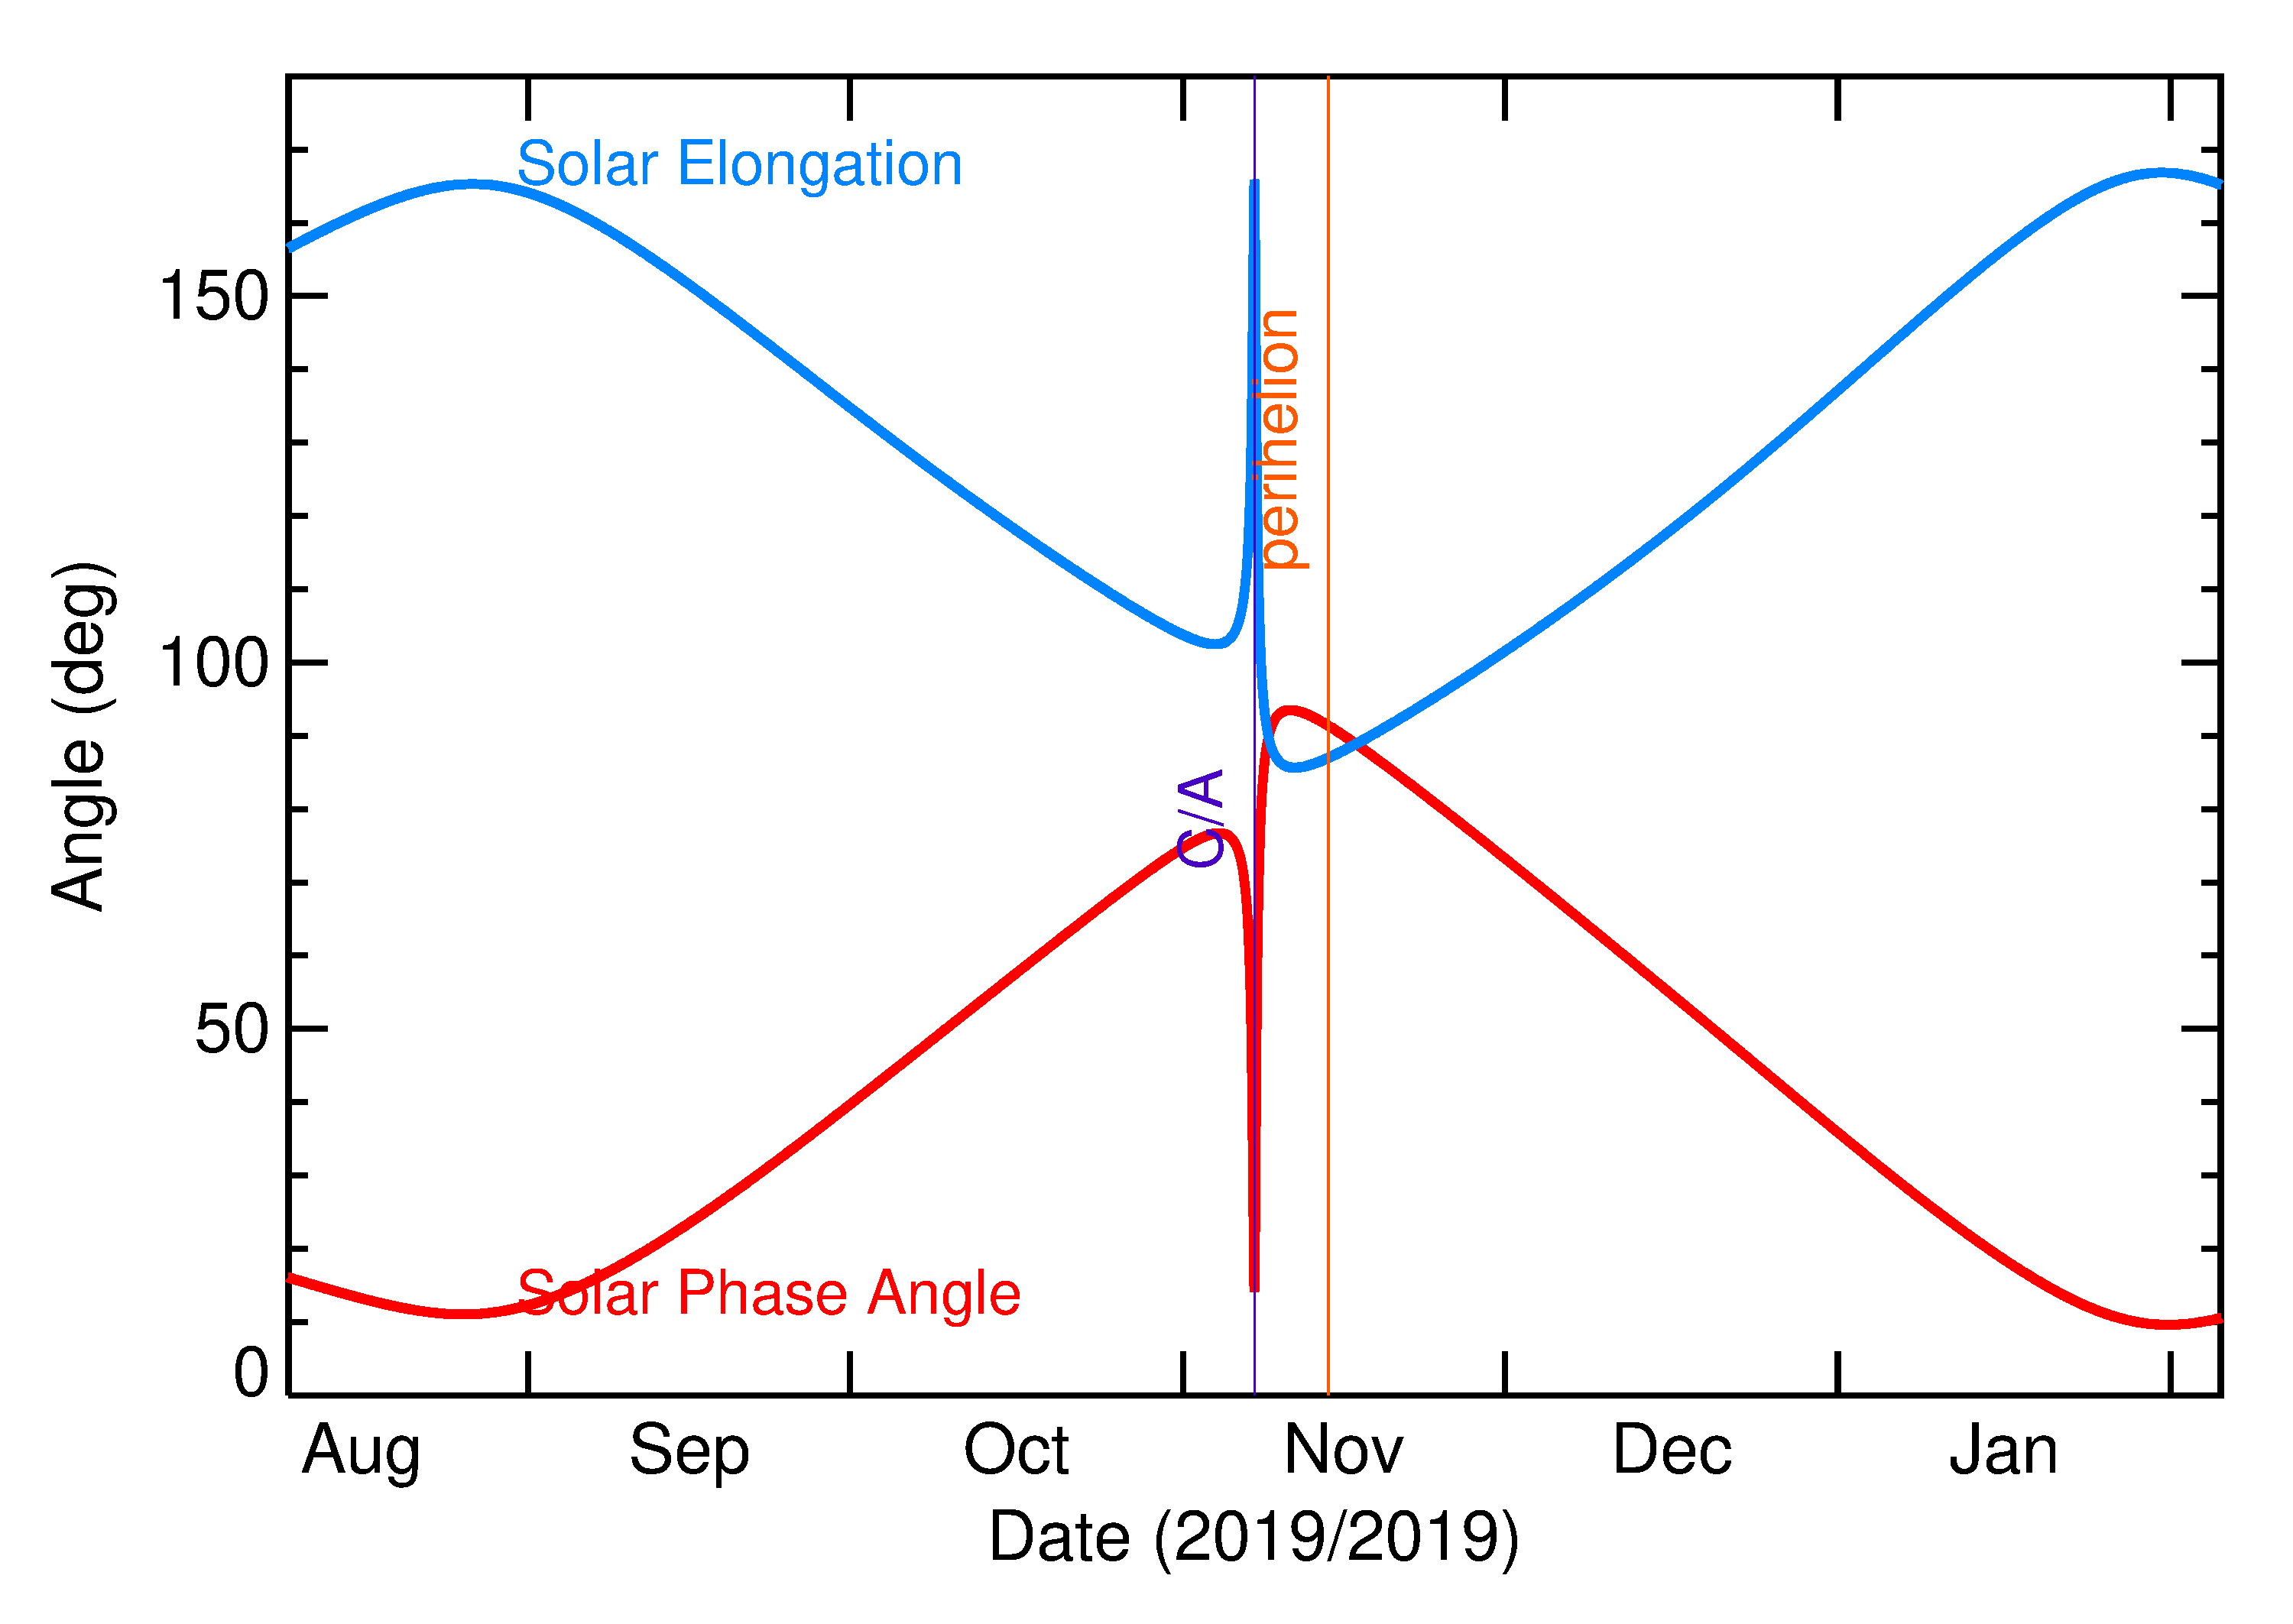 Solar Elongation and Solar Phase Angle of 2019 VS4 in the months around closest approach